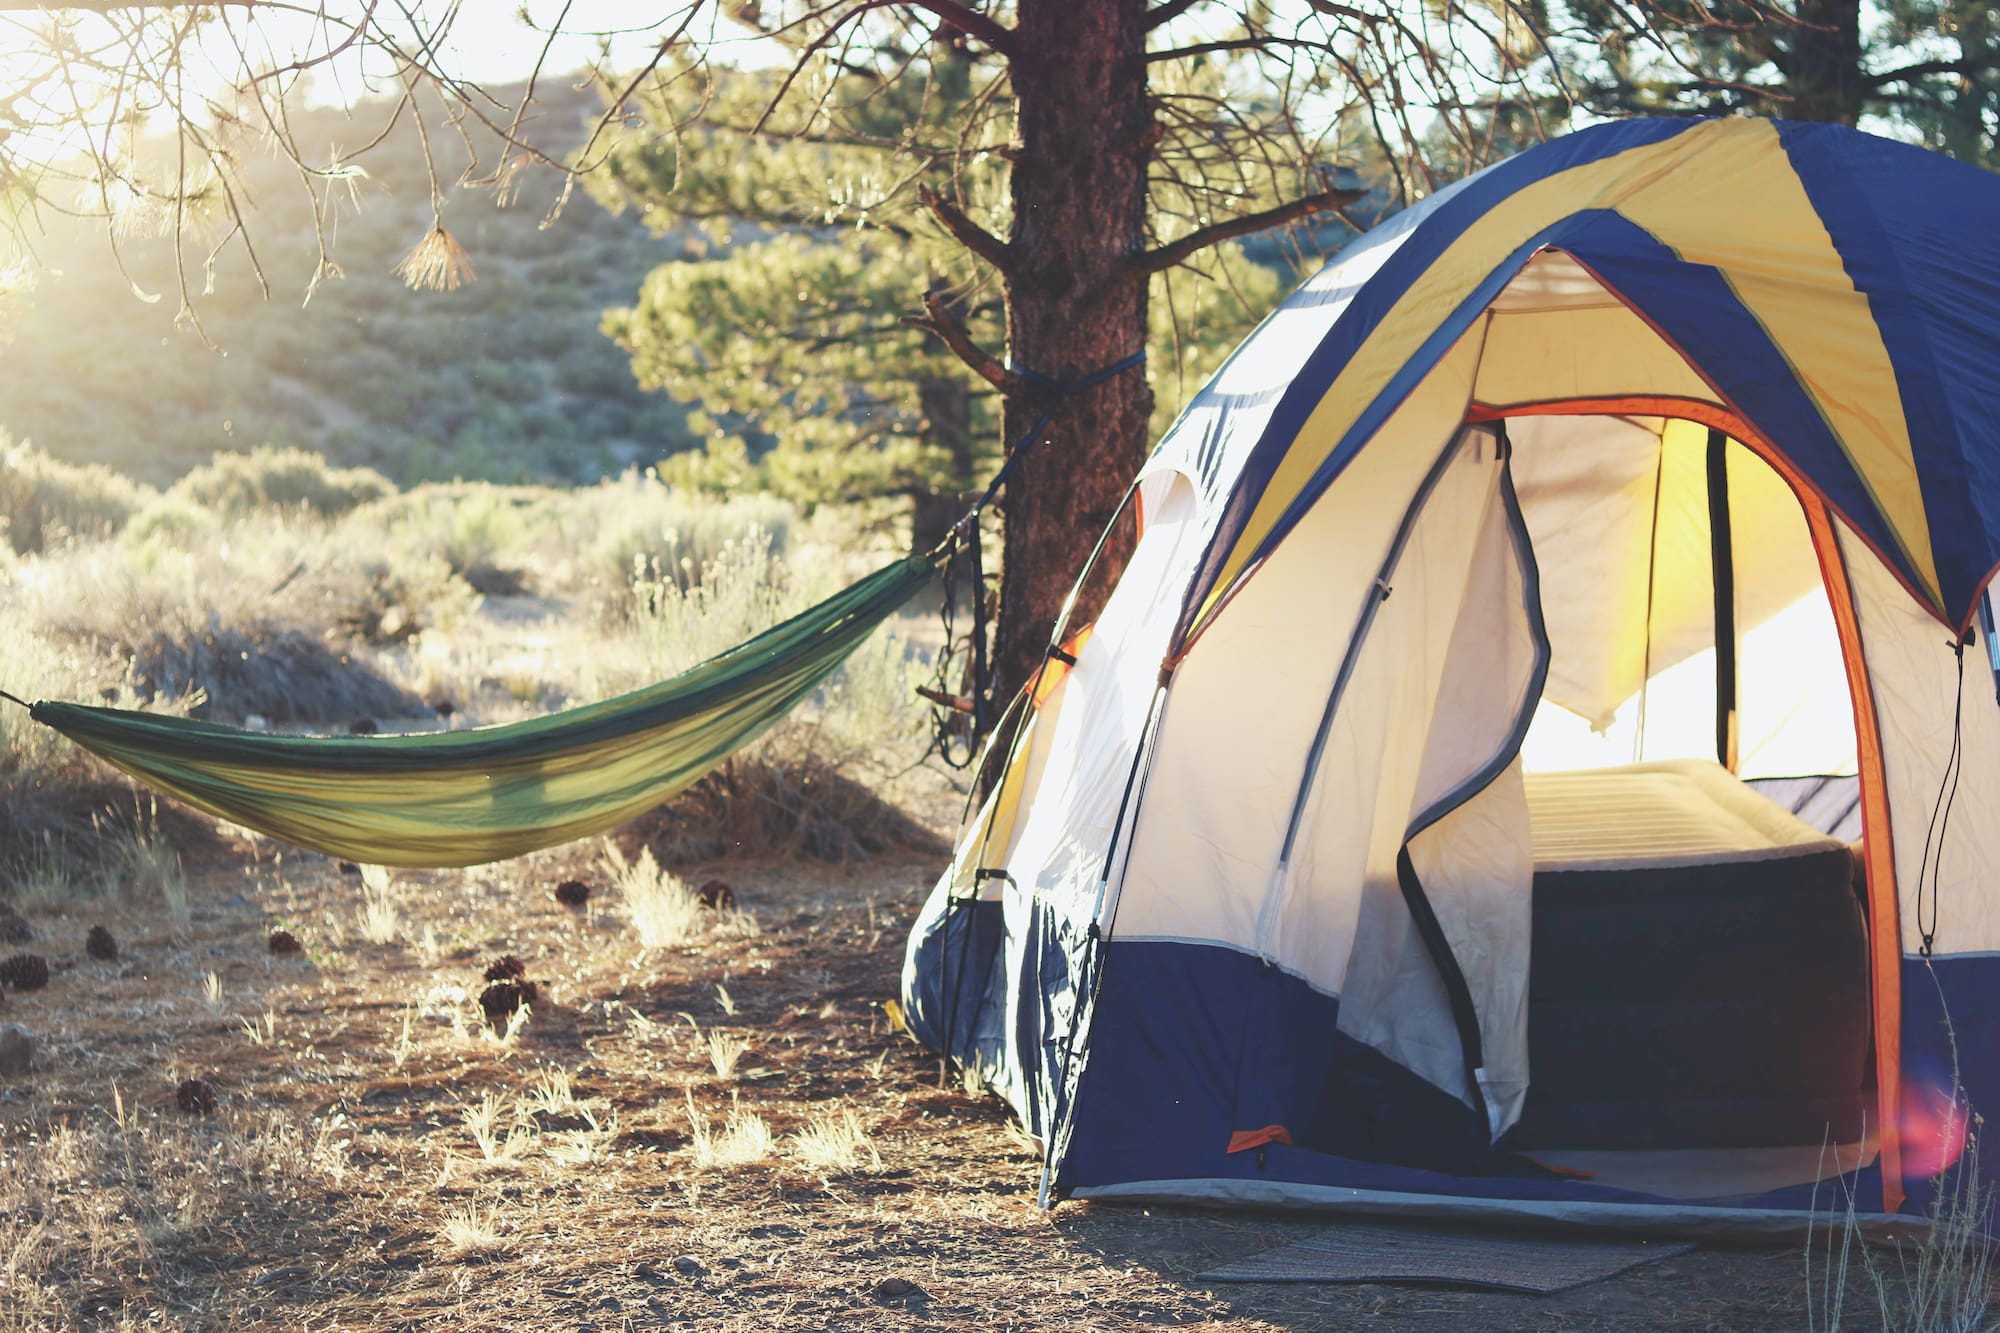 How to Find Free Dispersed Camping in National Forests